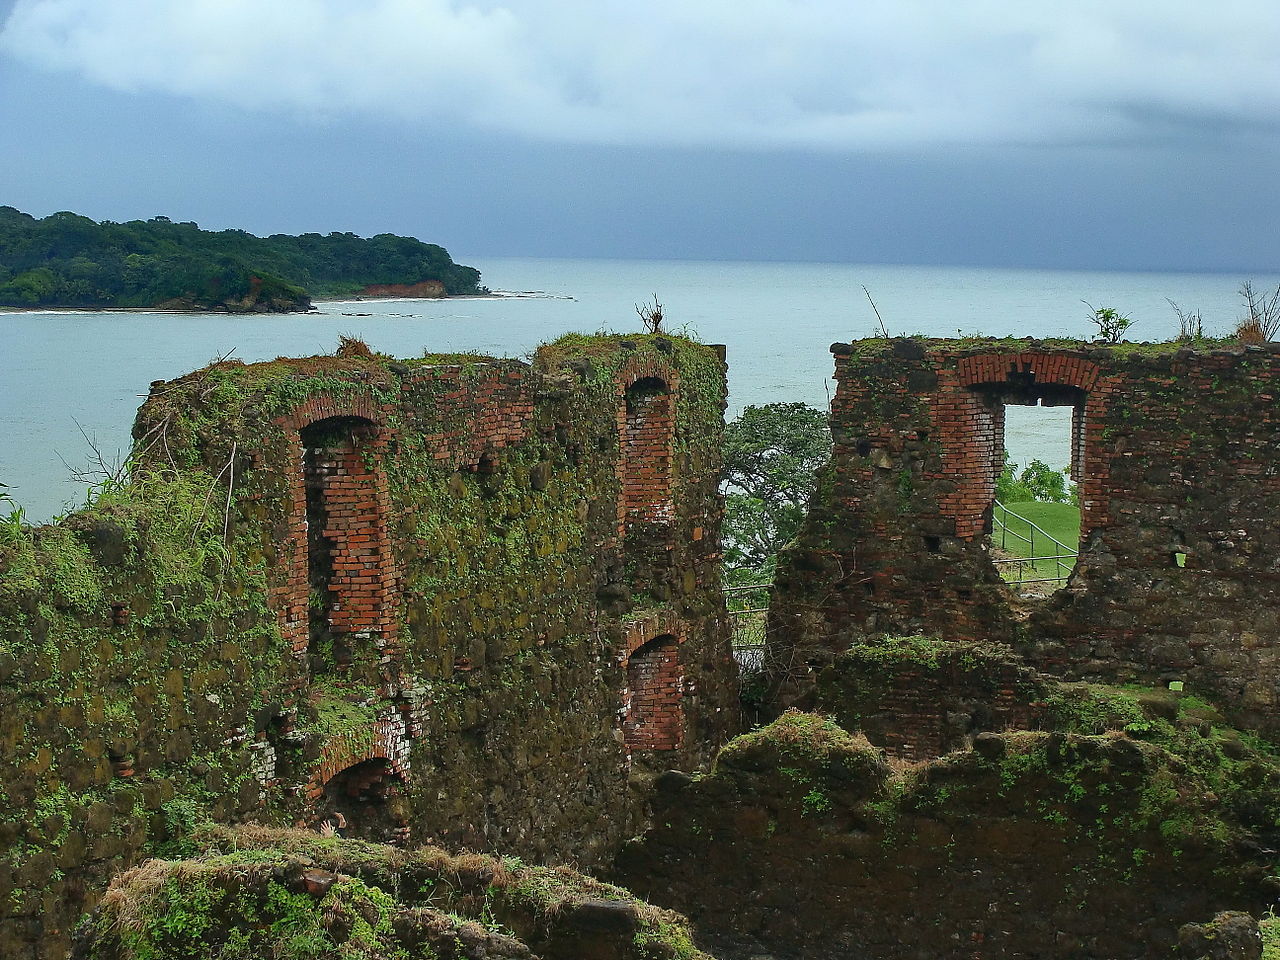 Photo of the ruins of Fort San Lorenzo. The fort in Portobelo-San Lorenzo on Panama’s Caribbean coast is a World Heritage site facing major conservation and maintenance issues relating to its masonry work. Photo by Ivo Kruusamägi (CC BY-SA 3.0) via Wikimedia Commons